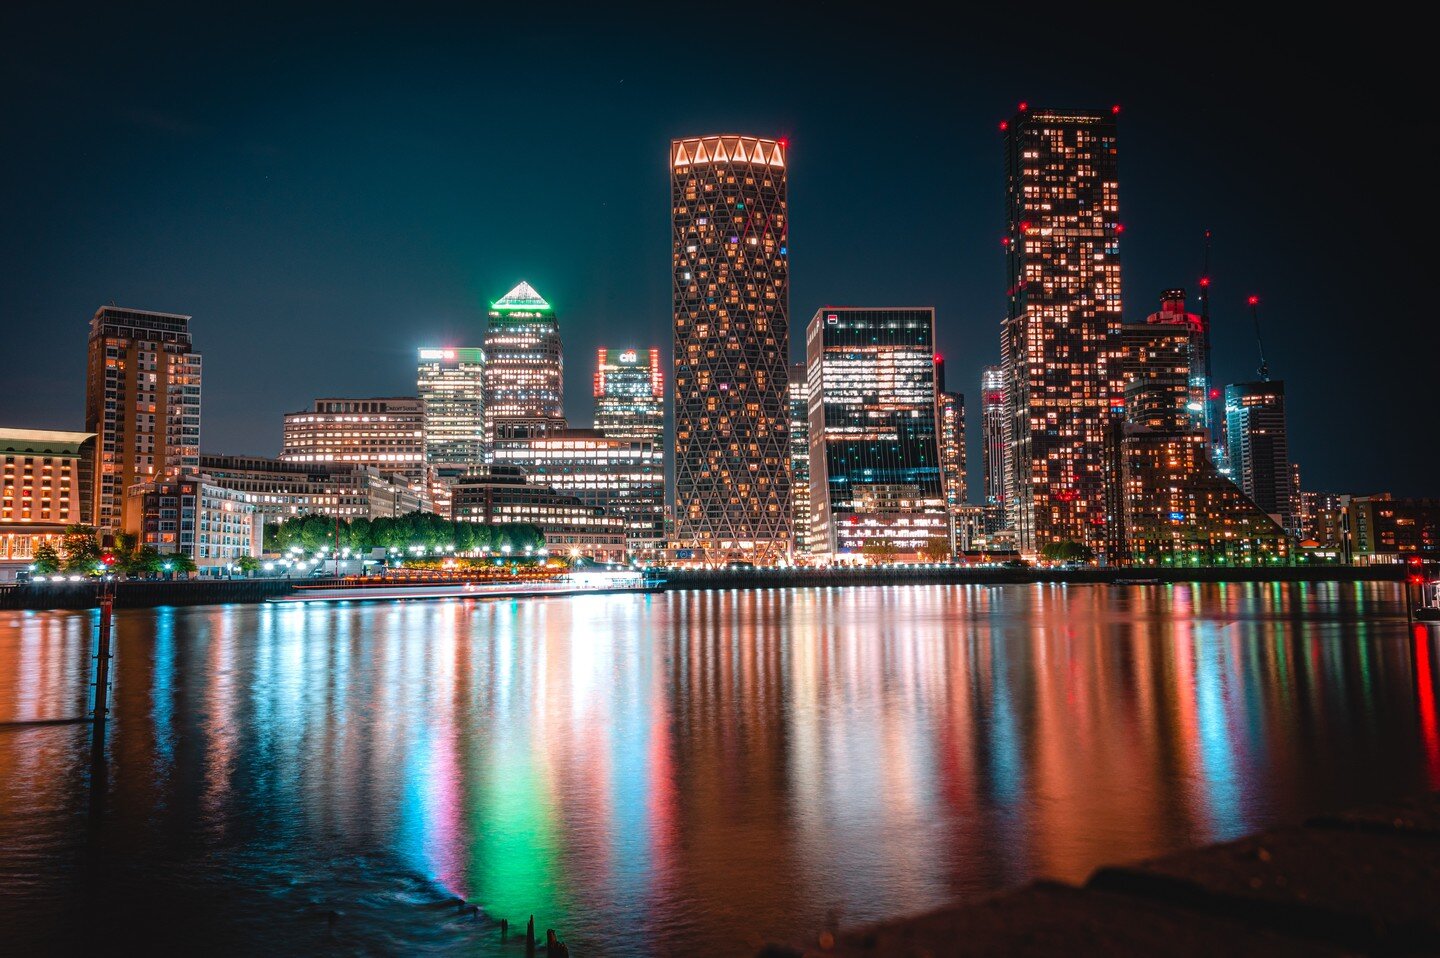 ⠀⠀⠀⠀⠀⠀⠀⠀
============================
⠀⠀⠀⠀⠀⠀⠀⠀⠀
📍 Canary Wharf, London, UK 🇬🇧
⠀⠀⠀⠀⠀⠀⠀⠀⠀
📷 Keir Gravil (@keirgravil)
⠀⠀⠀⠀⠀⠀⠀⠀⠀
📅 May 2023
⠀⠀⠀⠀⠀⠀⠀⠀⠀
============================
⠀⠀⠀⠀⠀⠀⠀⠀
A night-time stroll along the Thames at Rotherhithe
.
.
.
.
